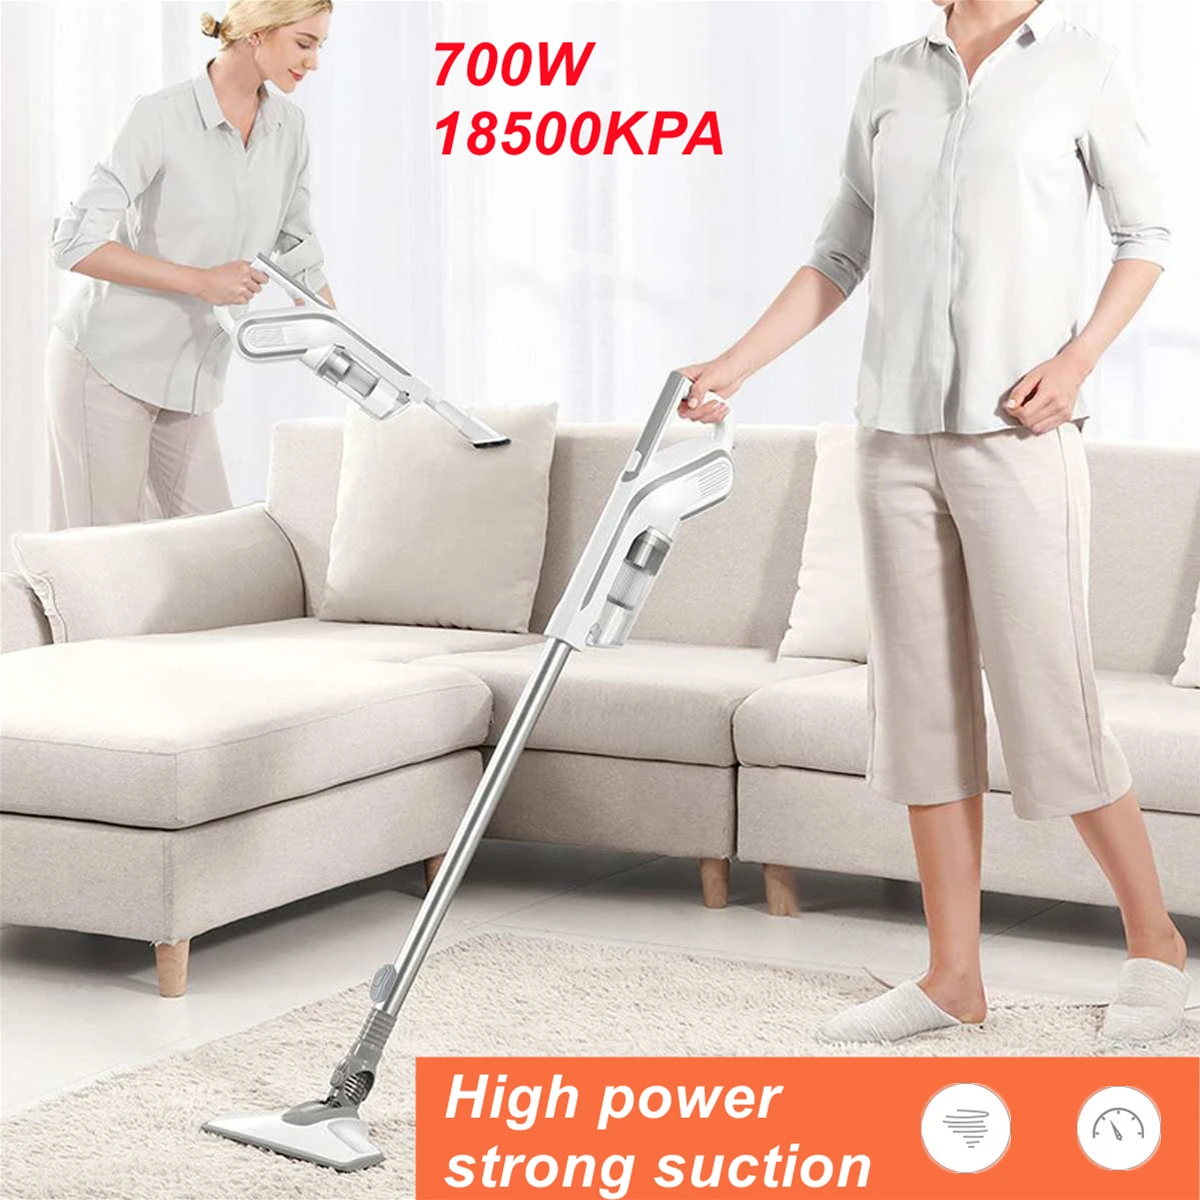 

Wireless Vacuum Cleaner Handheld Vacuum Cleaner 18500pa Cordless Stick Aspirator Carpet Car Dust Collect Sweep mites clean